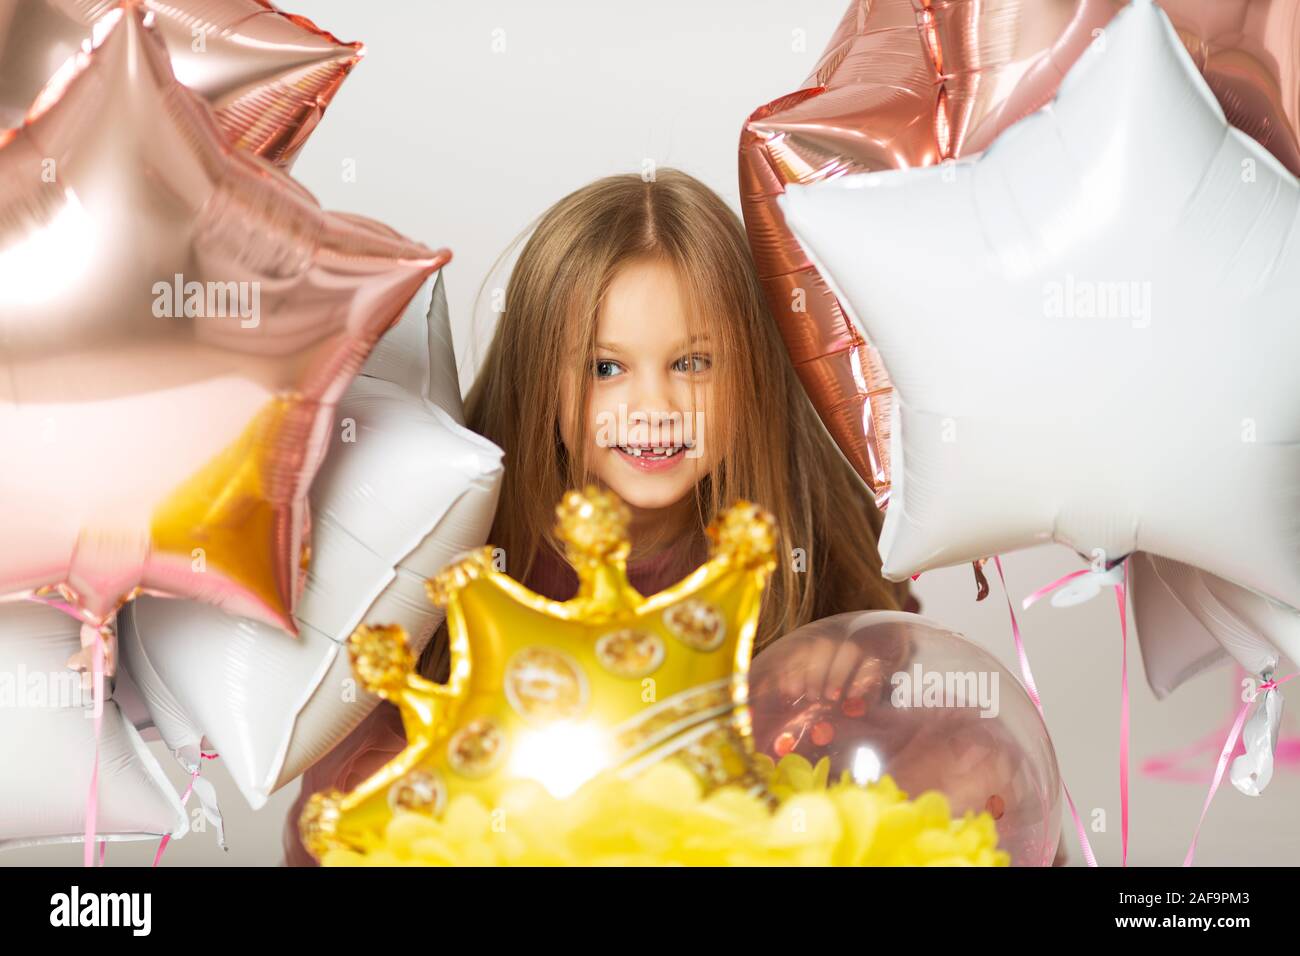 Little girl playing with balloons. Portrait of little girl playing with air balloons. Happy little girl holding colorful balloons.Smiling kid. Stock Photo